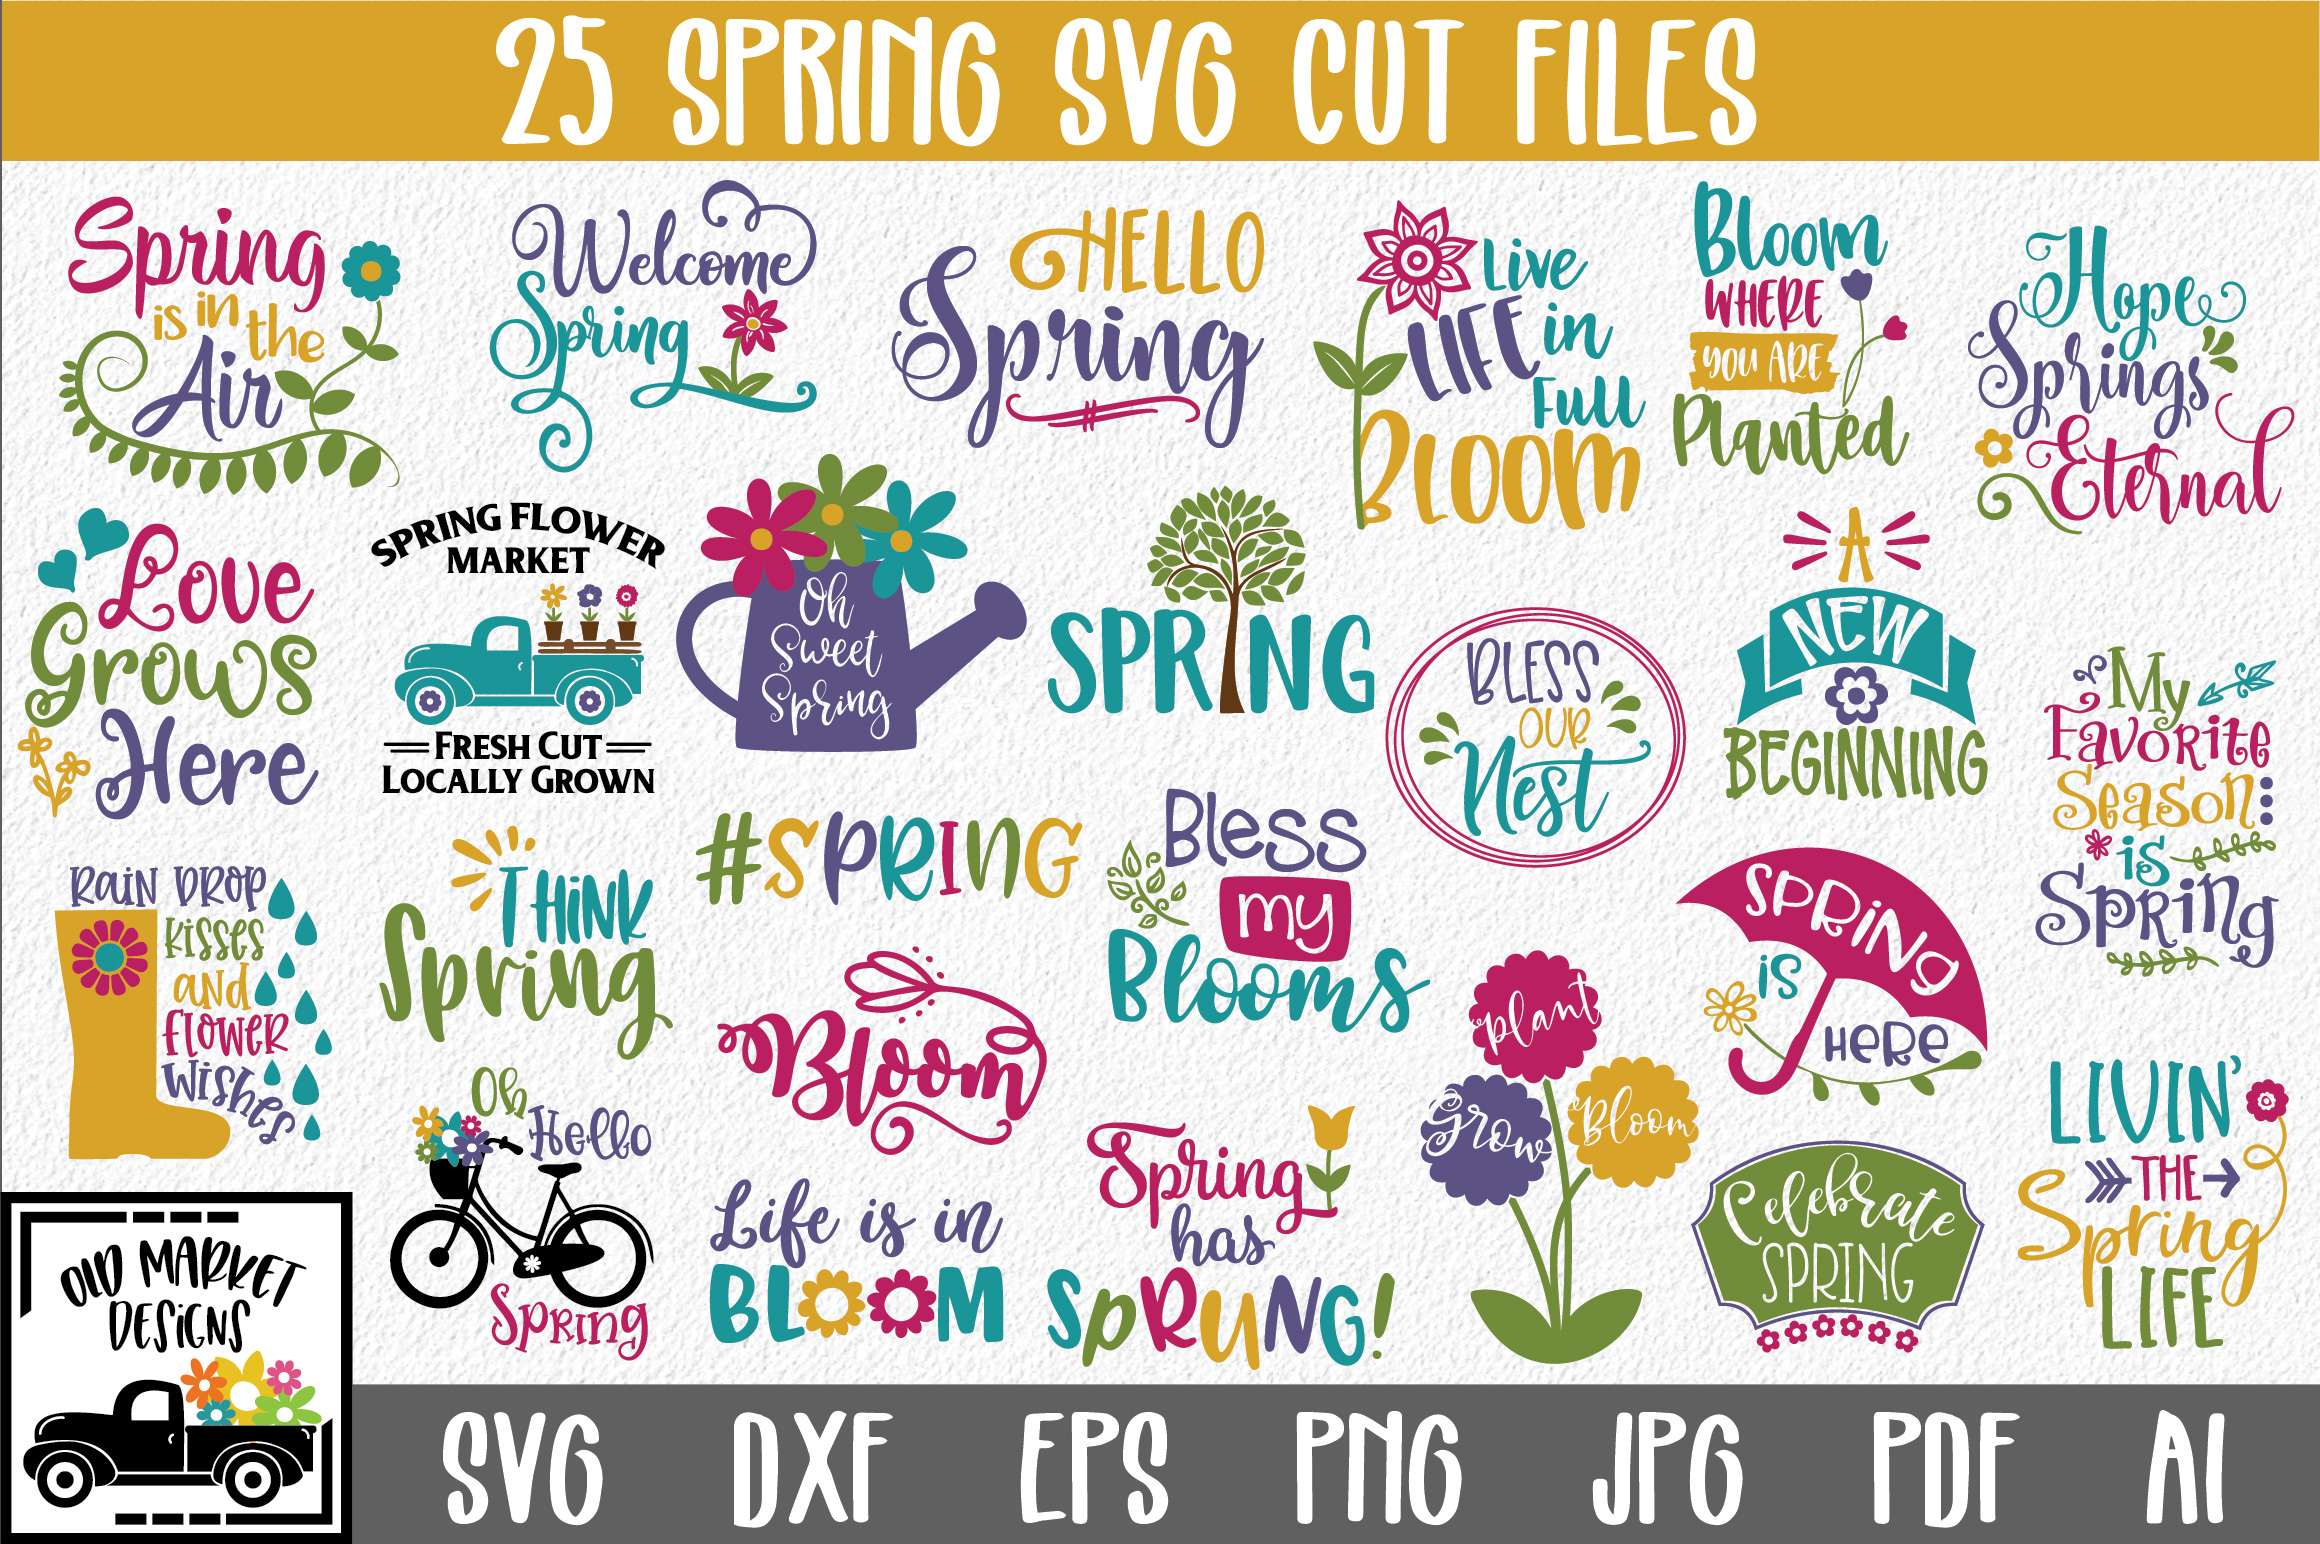 Download Spring SVG Bundle with 25 SVG Cut Files DXF EPS PNG AI JPG